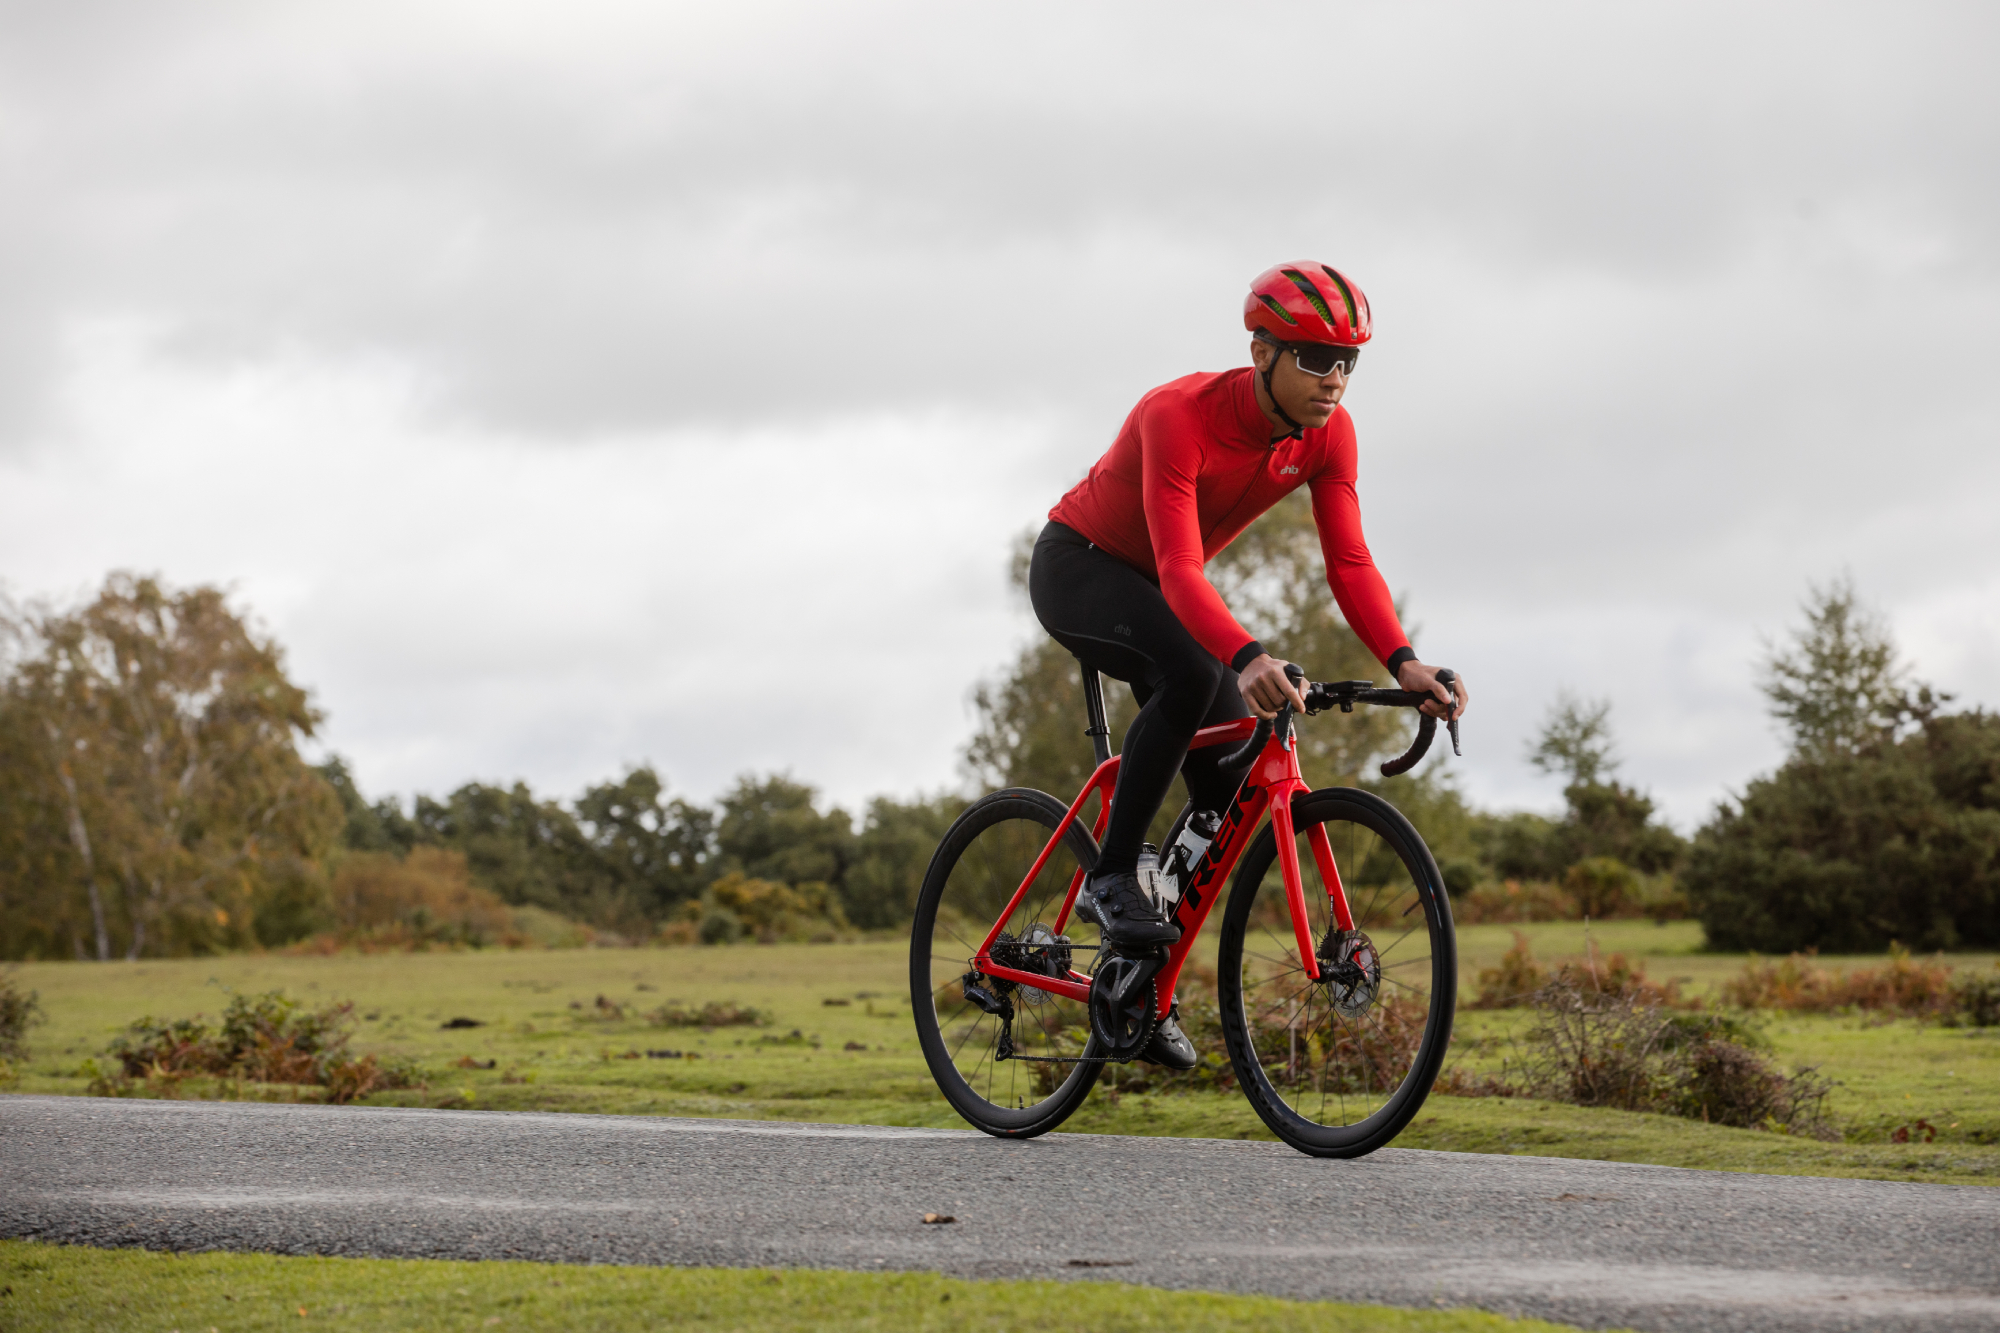 How to wear winter cycling clothing - Sportful